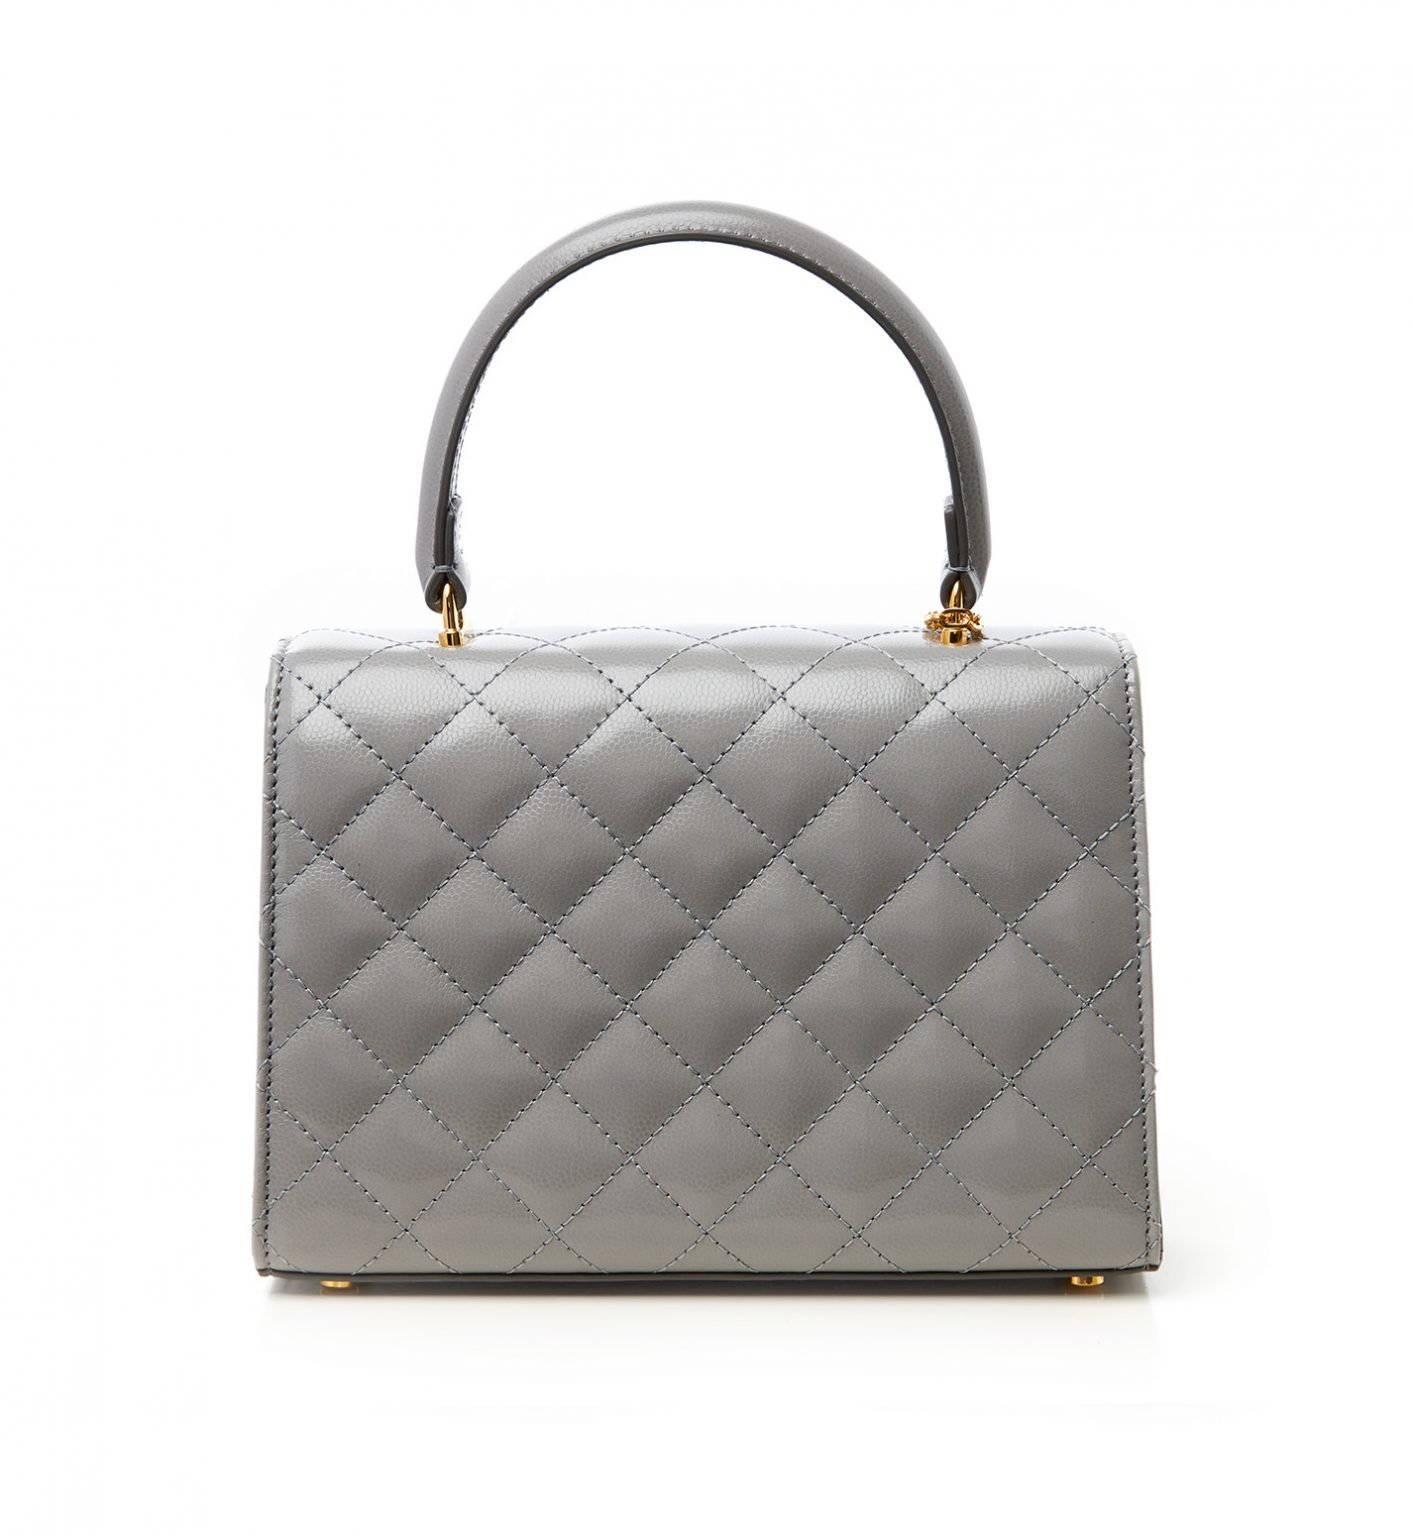 Grey quilted caviar leather bag - Slaylebrity